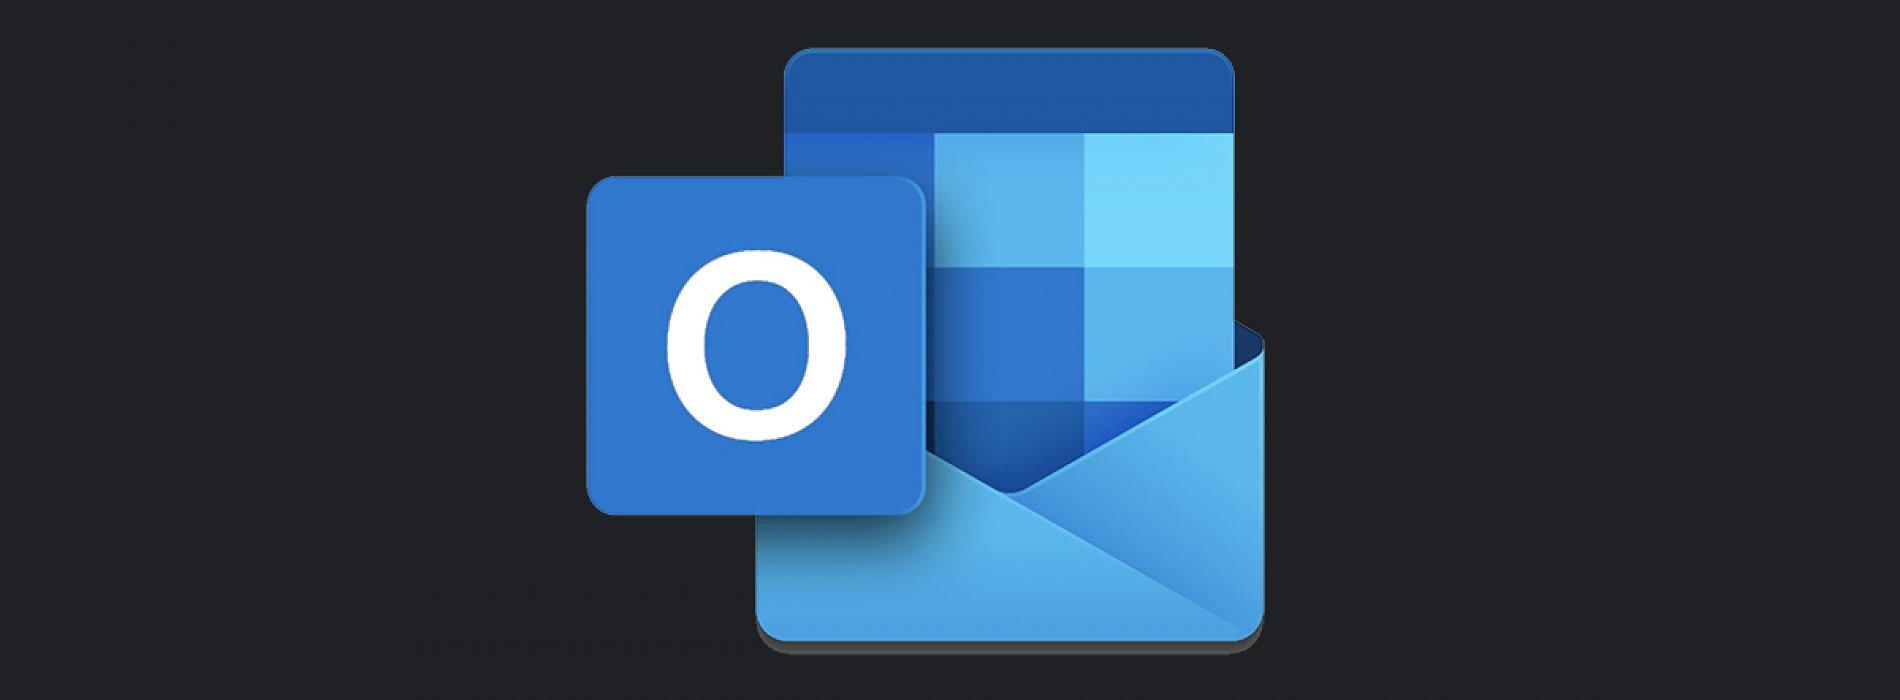 outlook for mac won